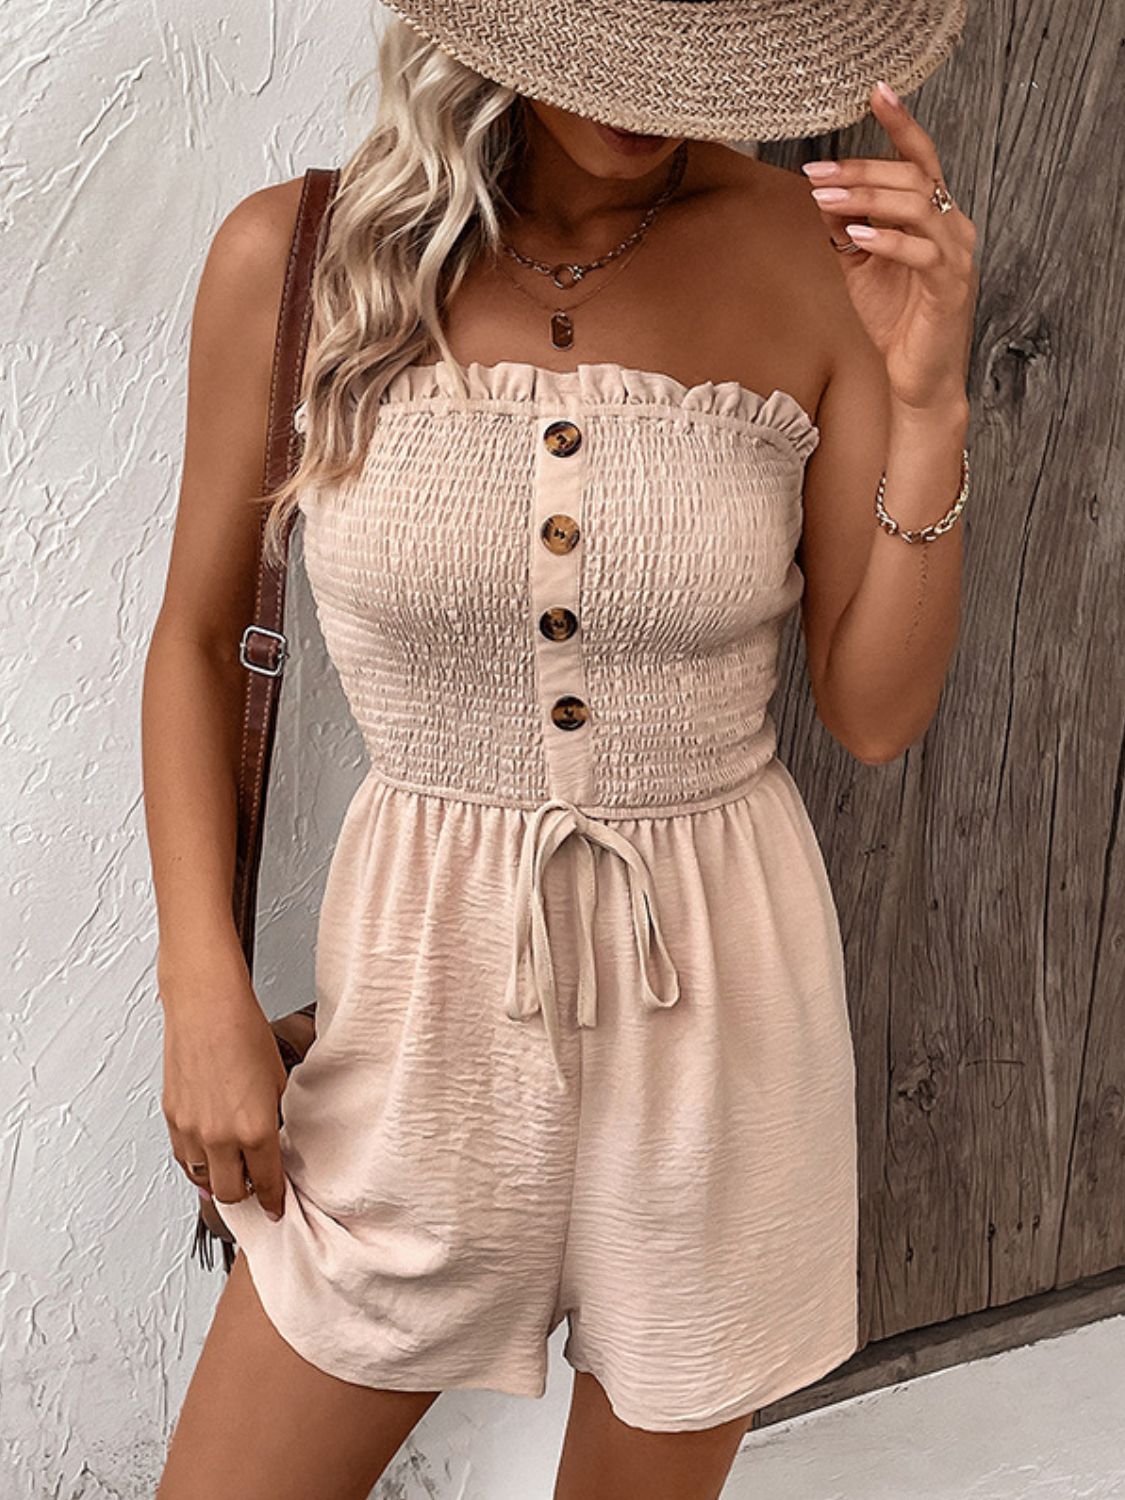 Decorative Button Smocked Strapless Romper  Sunset and Swim   